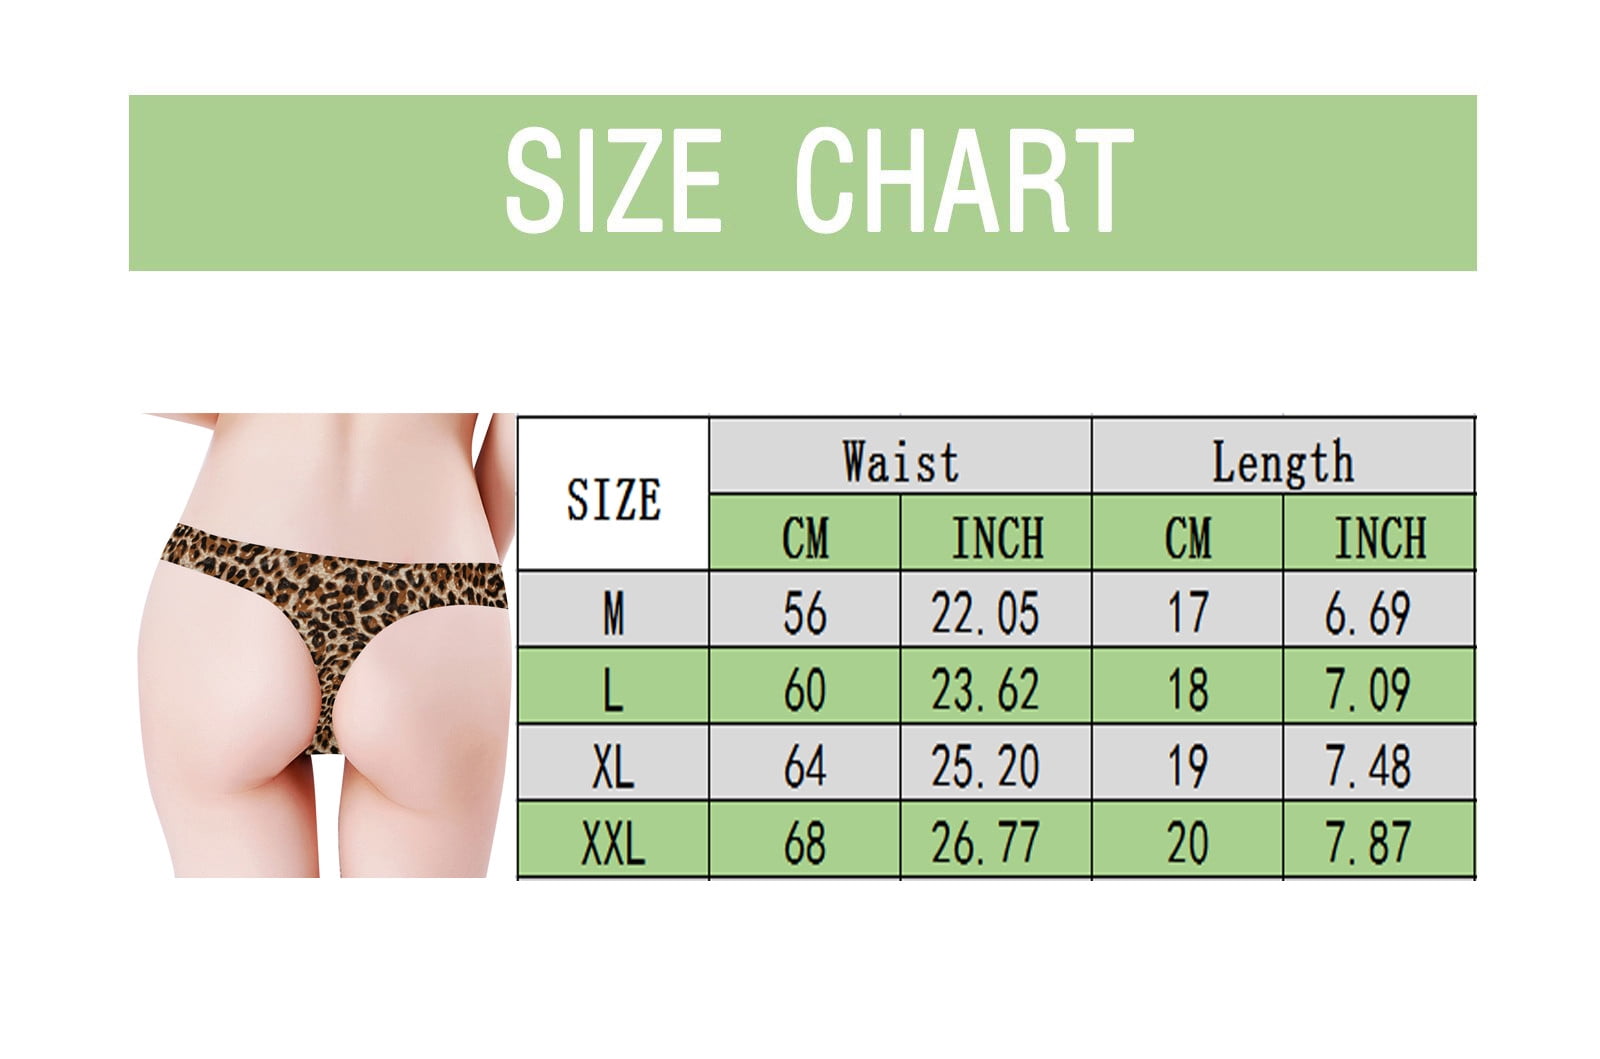 LBECLEY Ladies Panties Size 9 Womens Underwear Cotton Bikini Panties Lace  Soft Hipster Panty Ladies Stretch Full Briefs Nylon Panties with Cotton  Crotch for Women Briefs Black M 